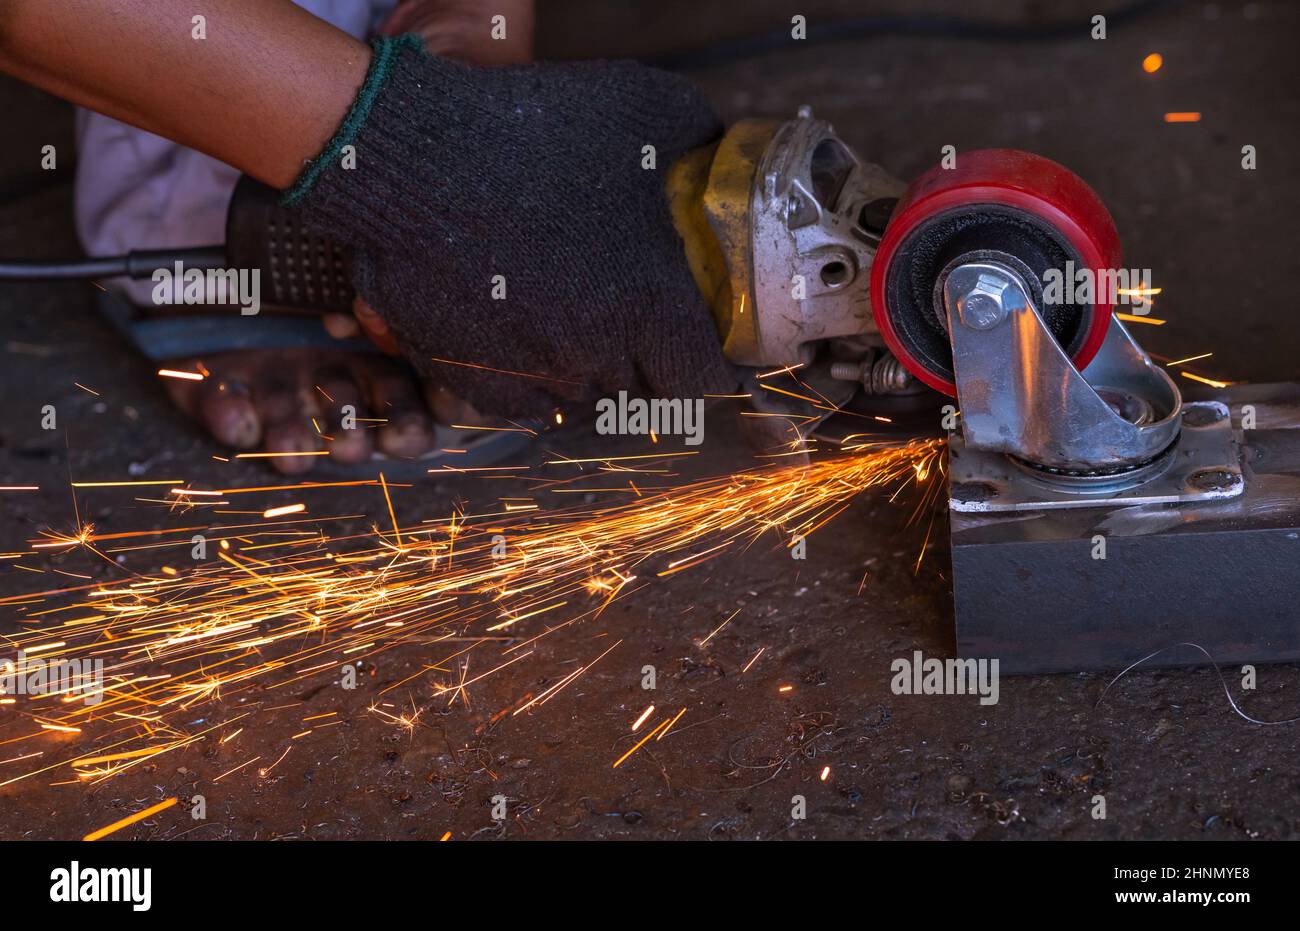 Industrial worker using angle grinder cutting metal. Worker working with angle grinder and has orange sparks. Tool for cut and grinding steel. Safety in industrial workplace. Metal factory industry. Stock Photo